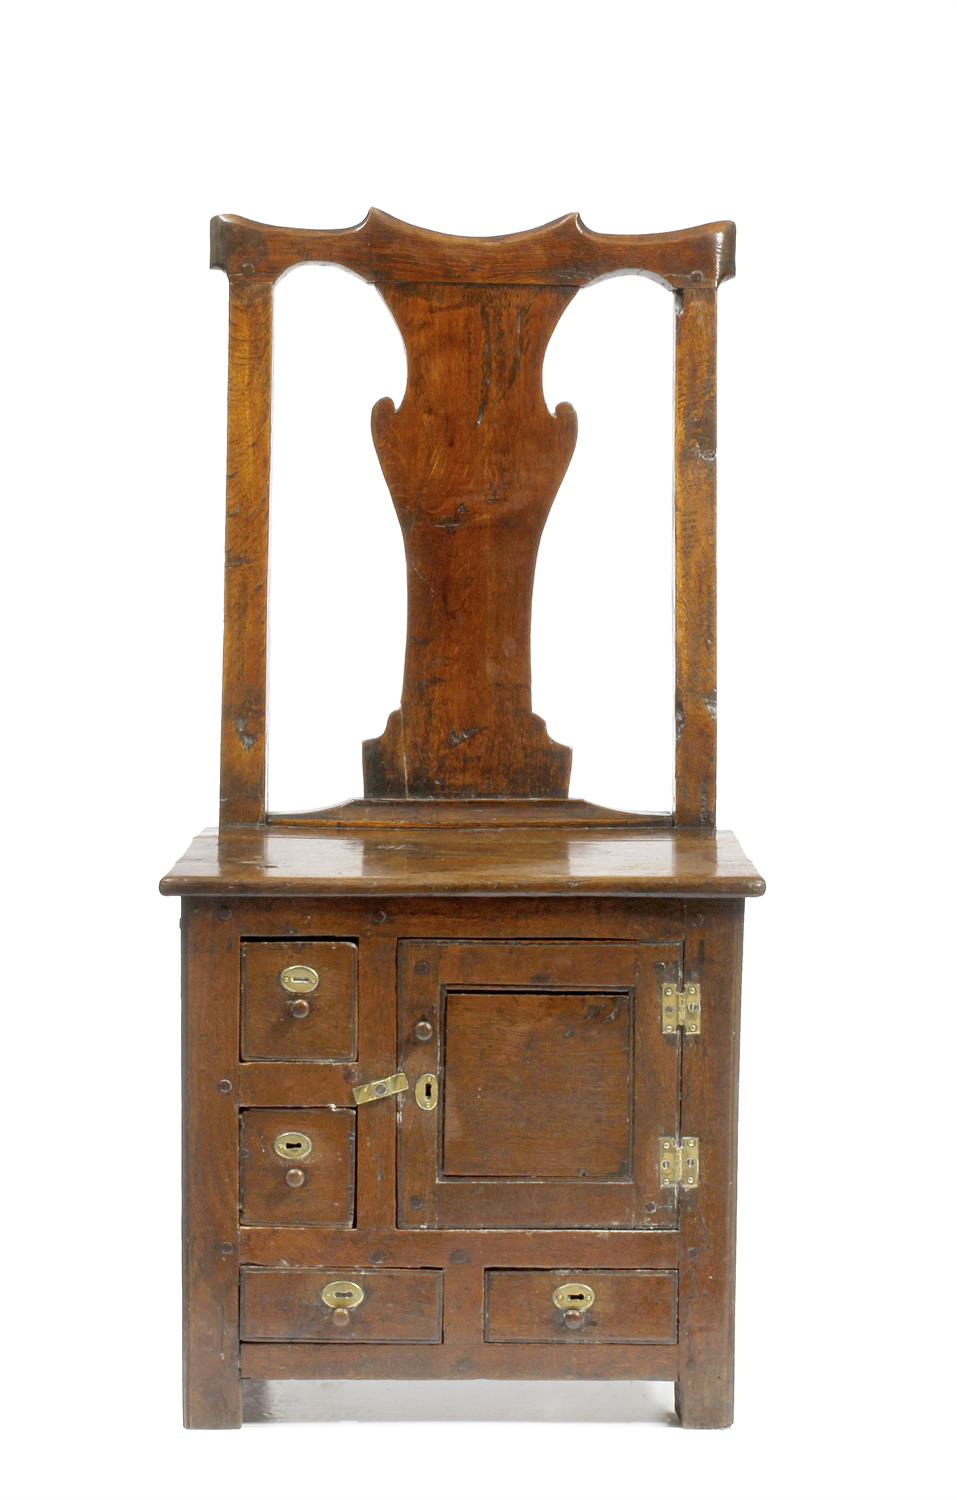 Lot 202 - A GEORGE III IRISH OAK COUNTRY CHAIR possibly from County Antrim with solid vase shaped splat back a